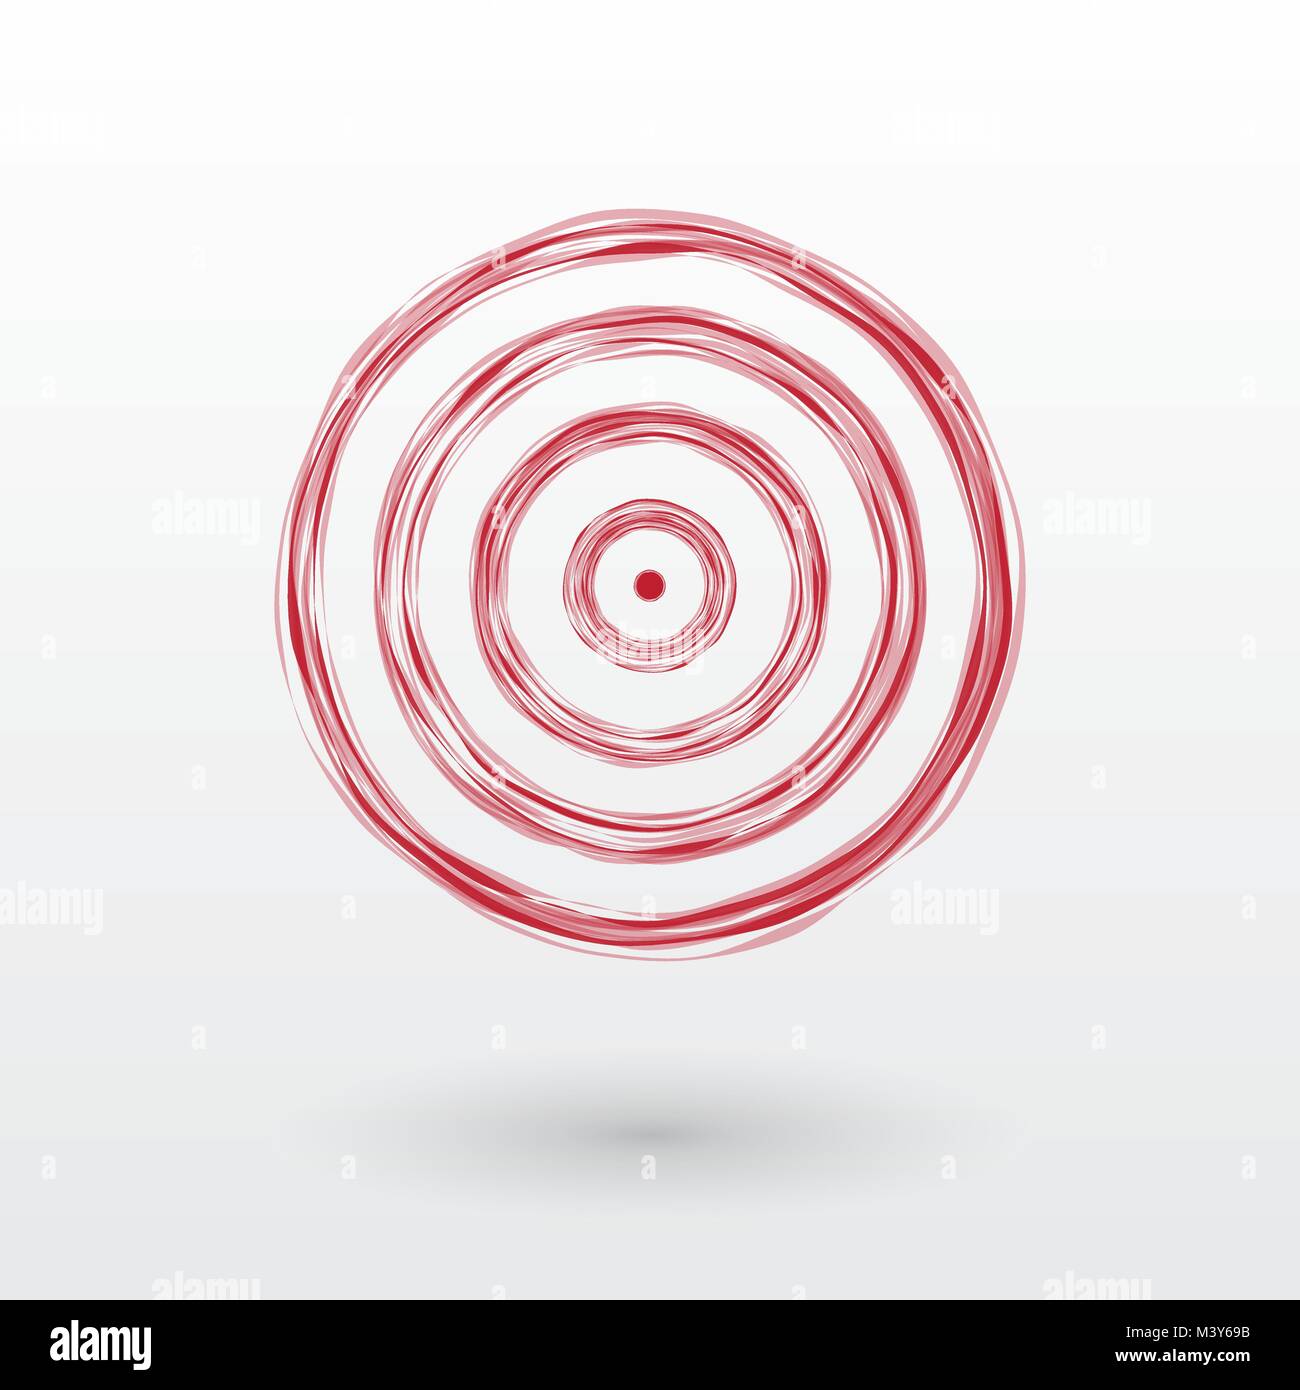 The red target composed of thin lines Stock Vector